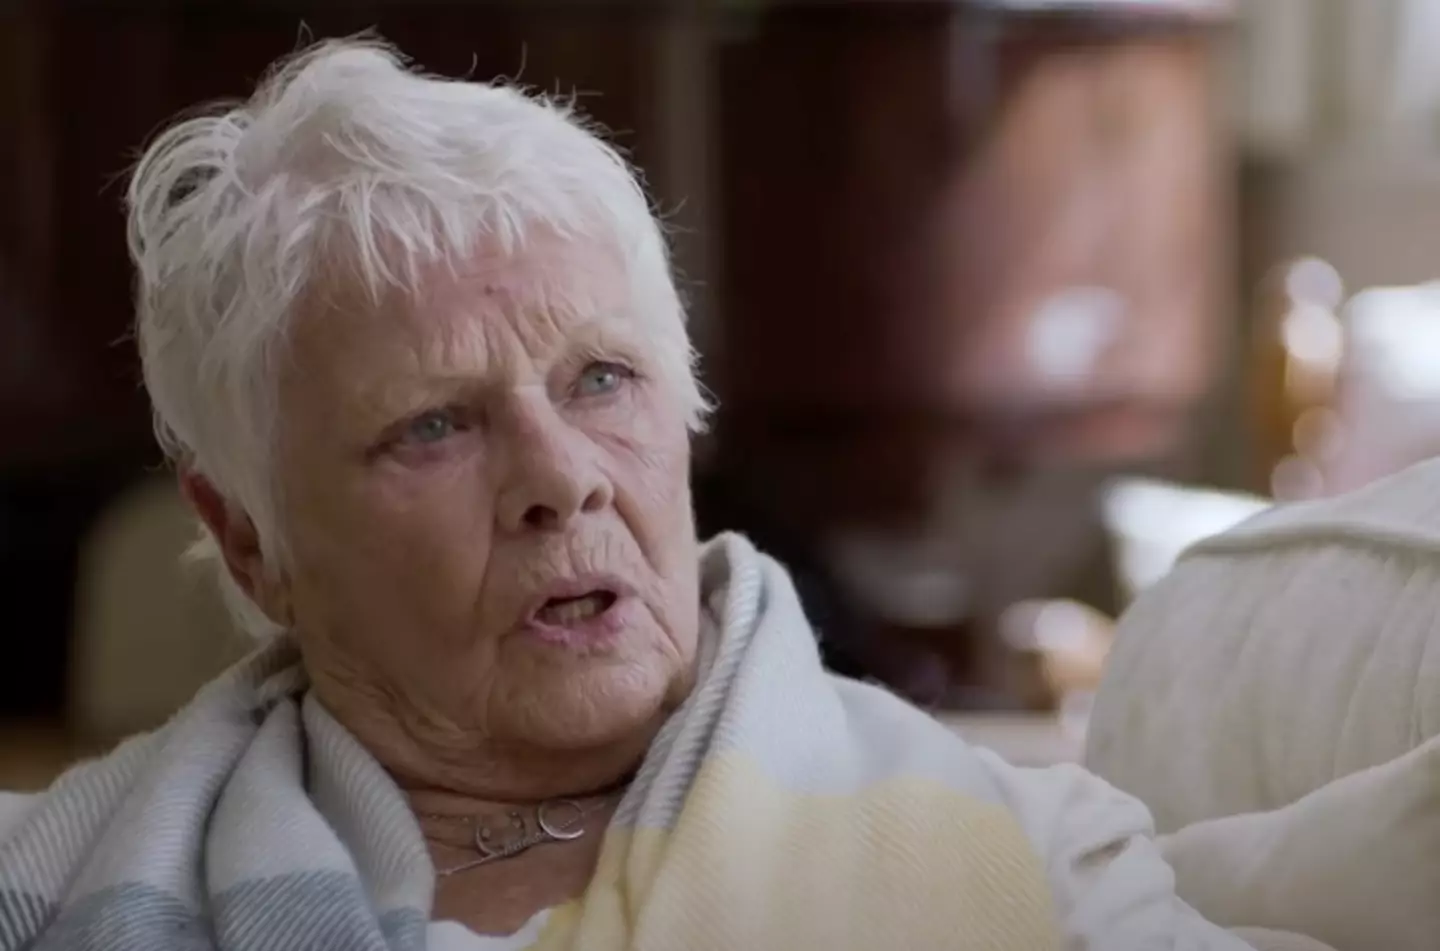 Theroux asked Dench about being a 'national treasure'.